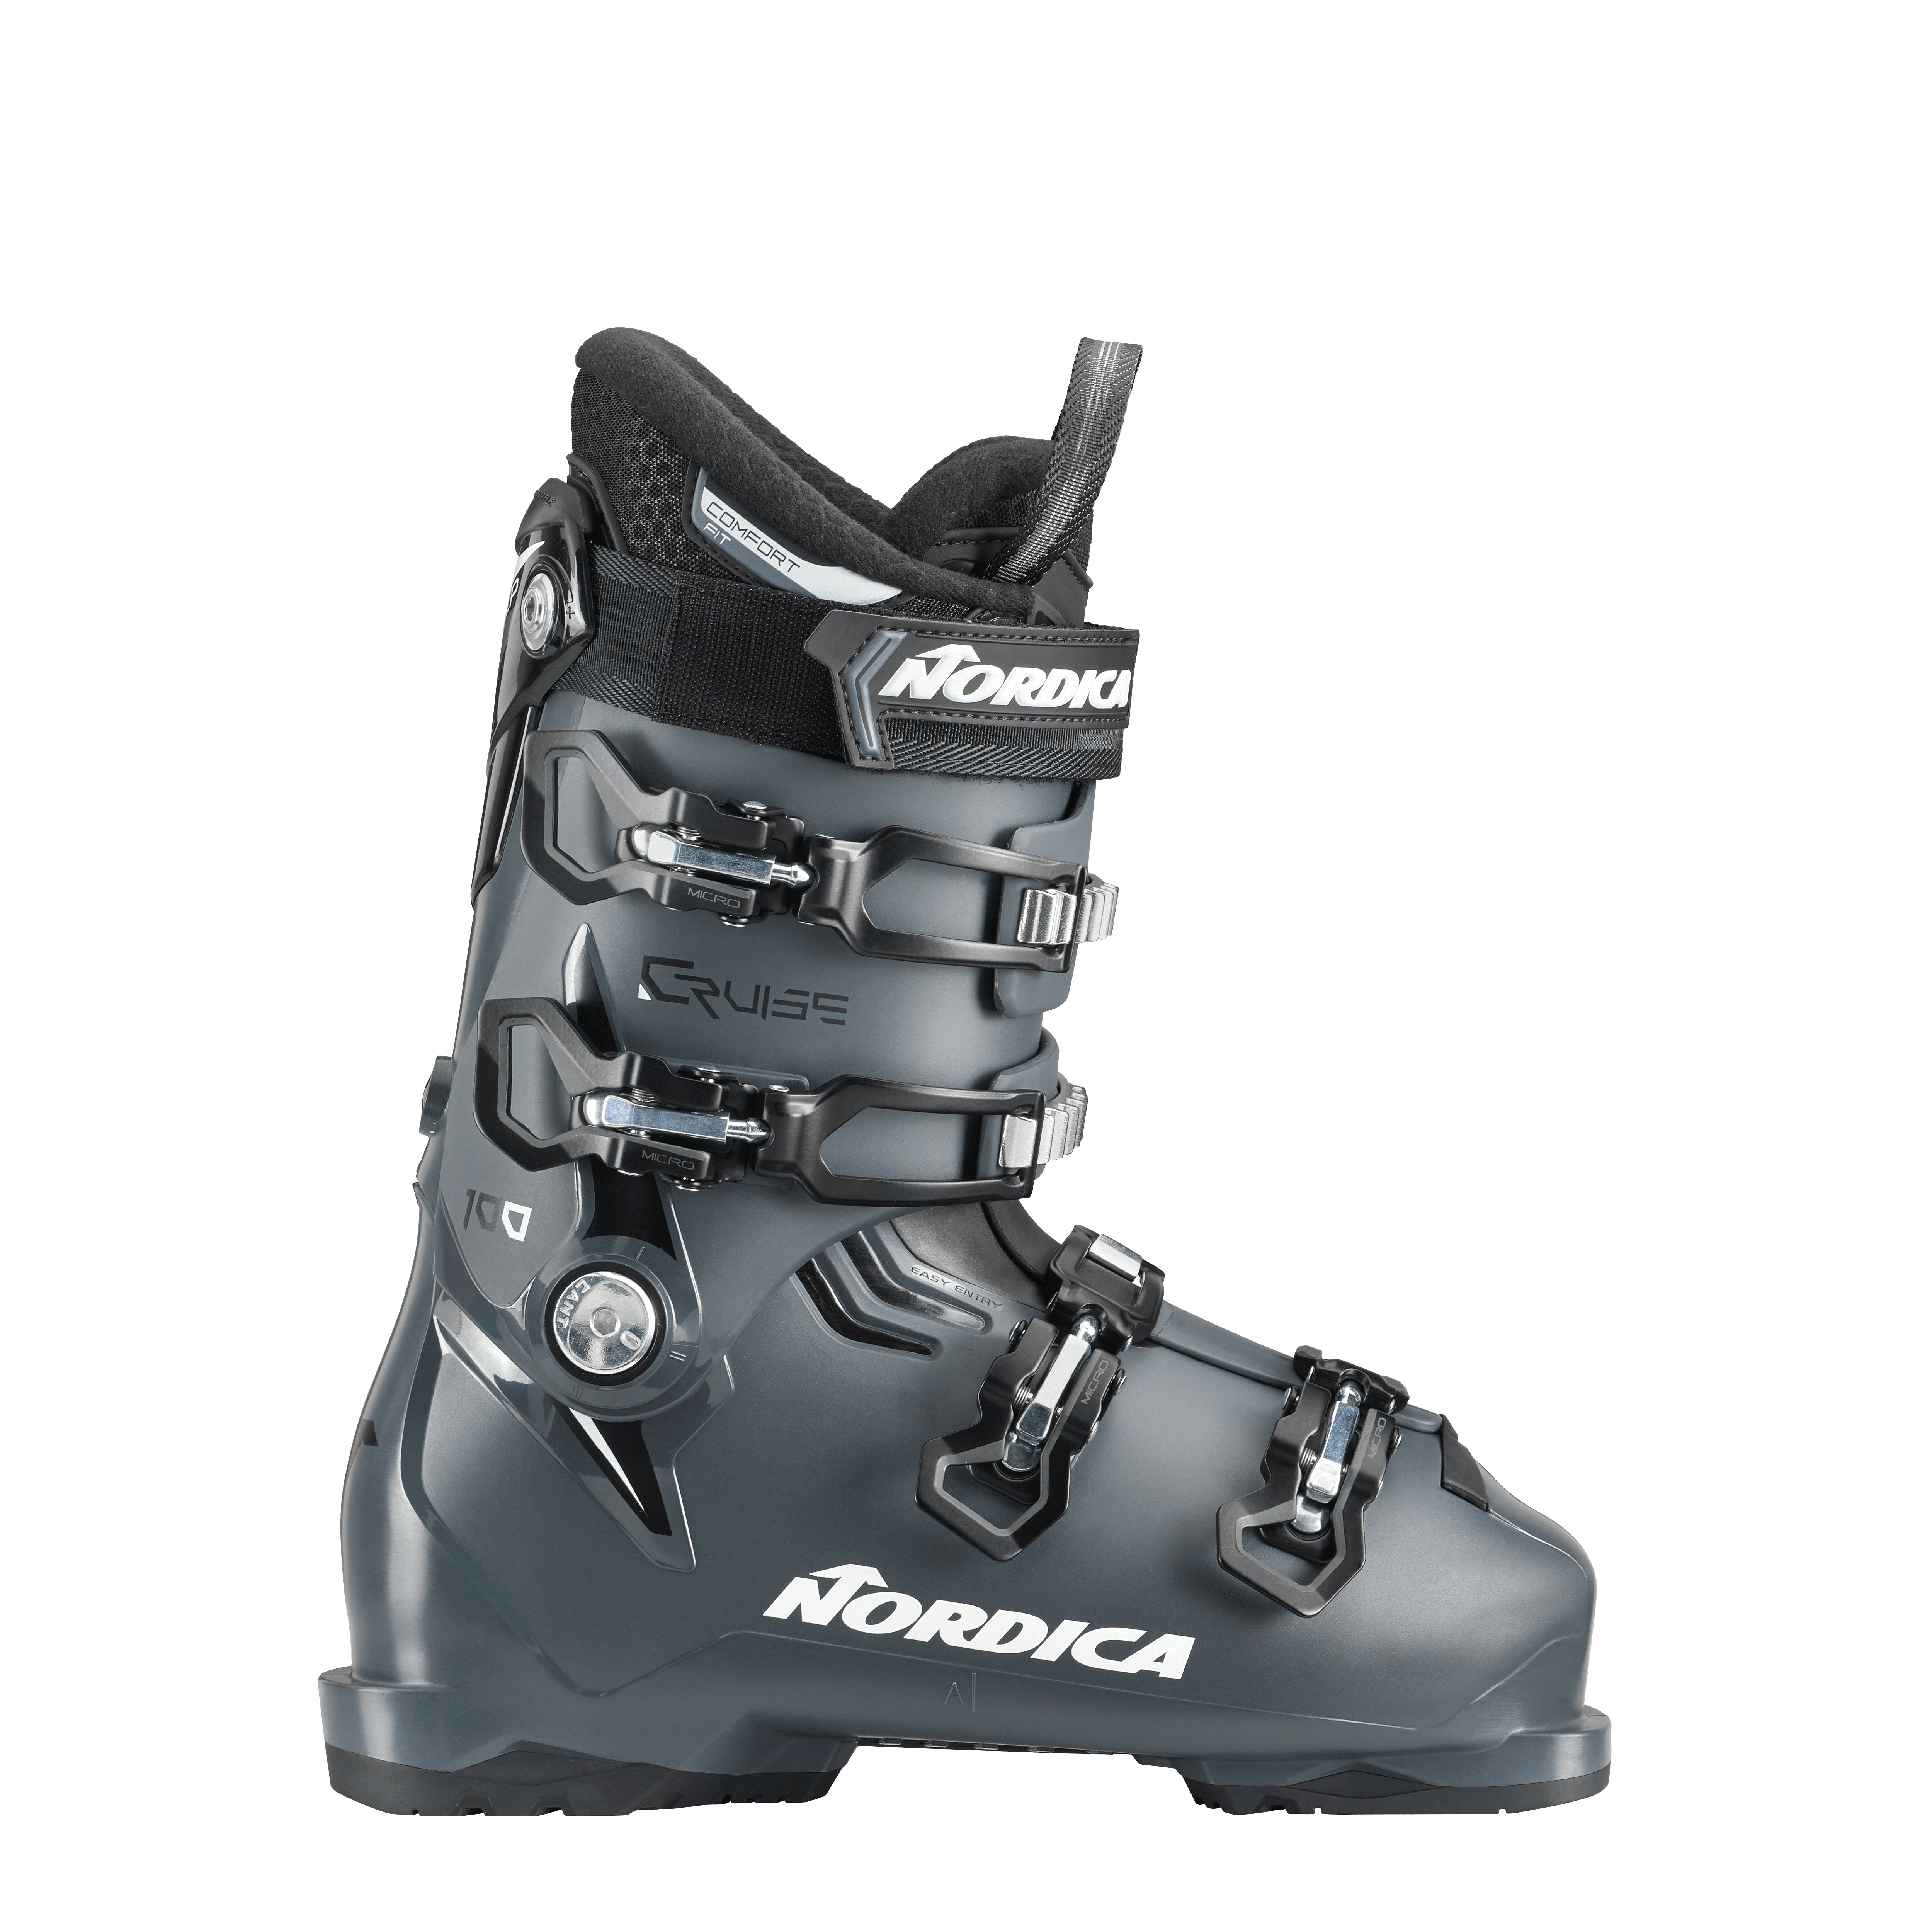 Sportmachine 3 90 - Nordica - Skis and Boots – Official website